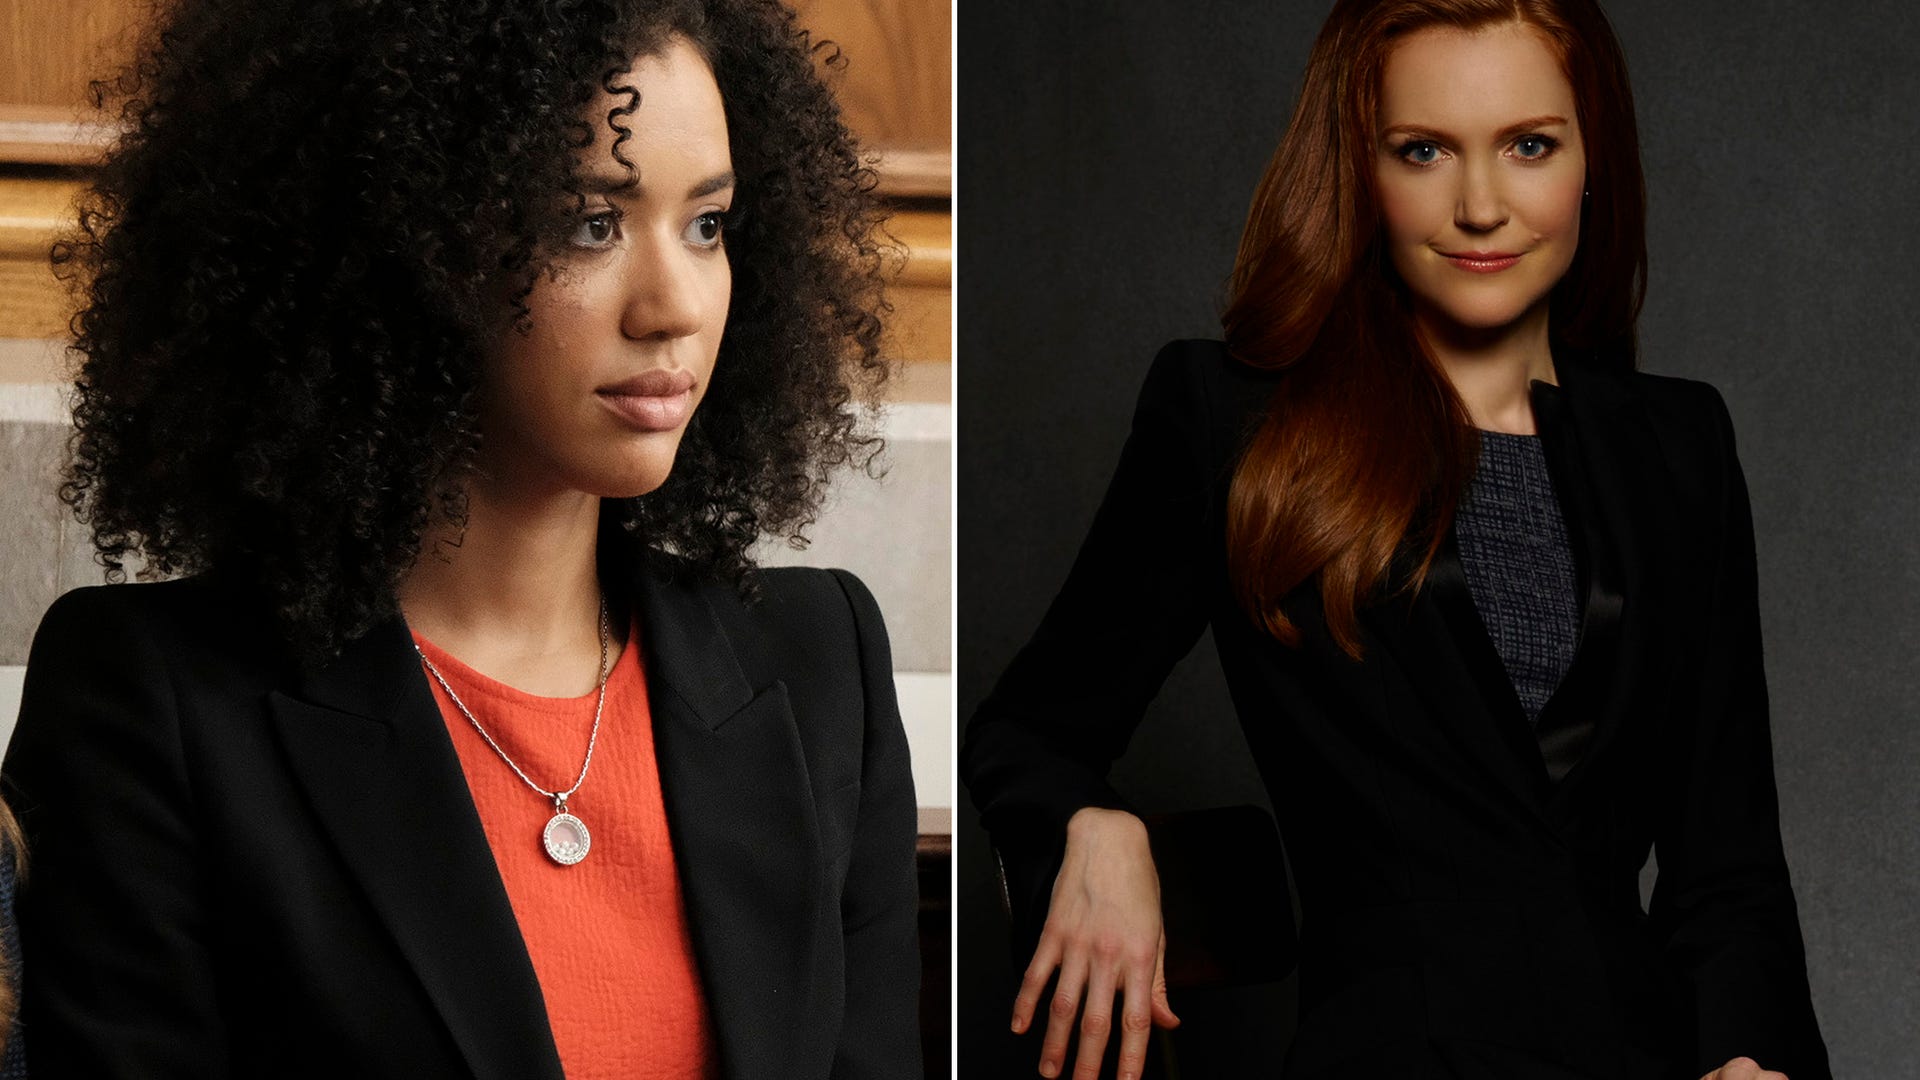 Jasmin Savoy Brown (For the People) and Darby Stanchfield (Scandal)​